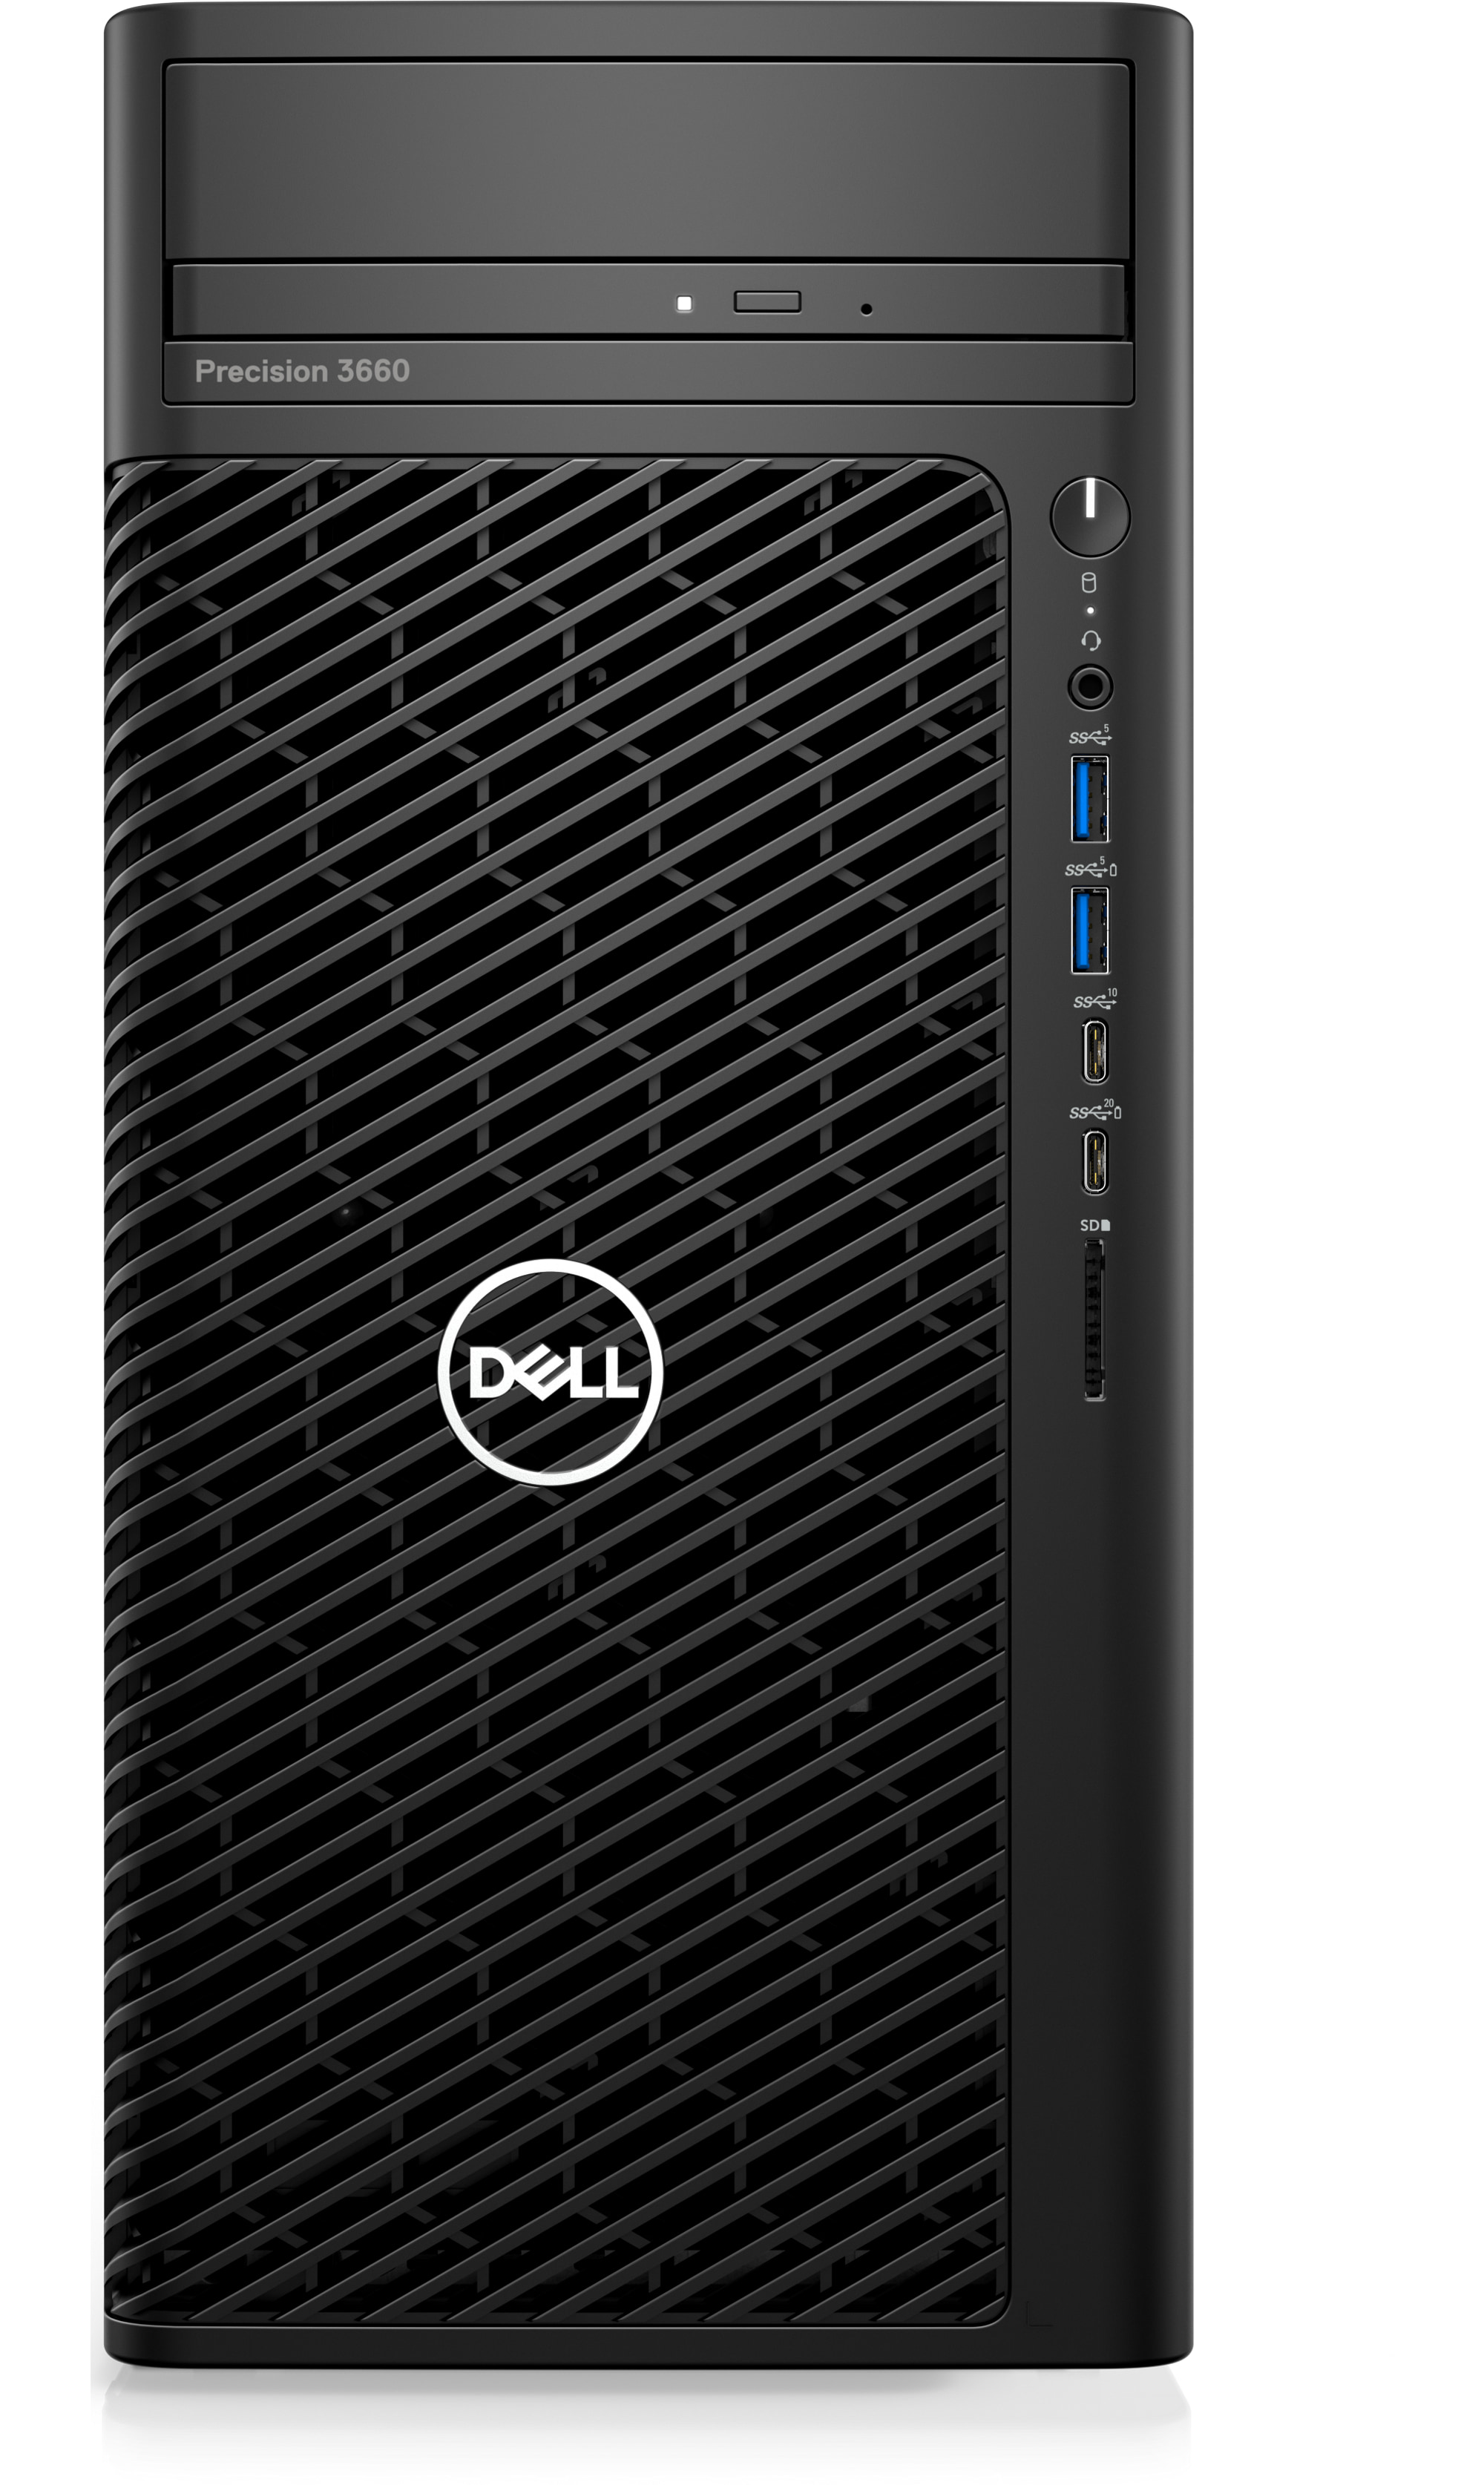 Precision 3660 Tower Workstation : Computer Workstations | Dell USA